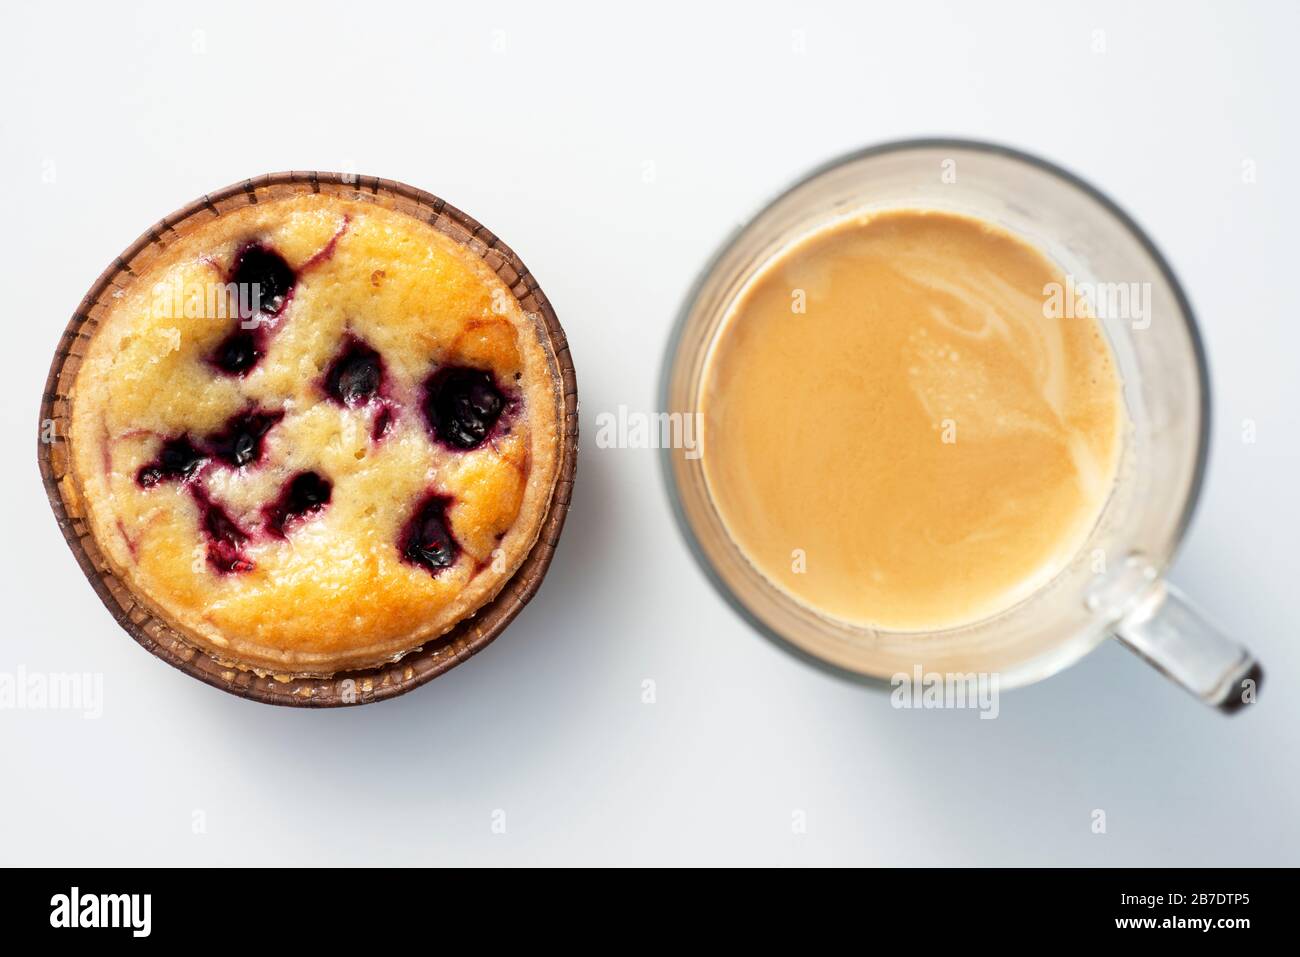 M&S blueberry tart and coffee Stock Photo